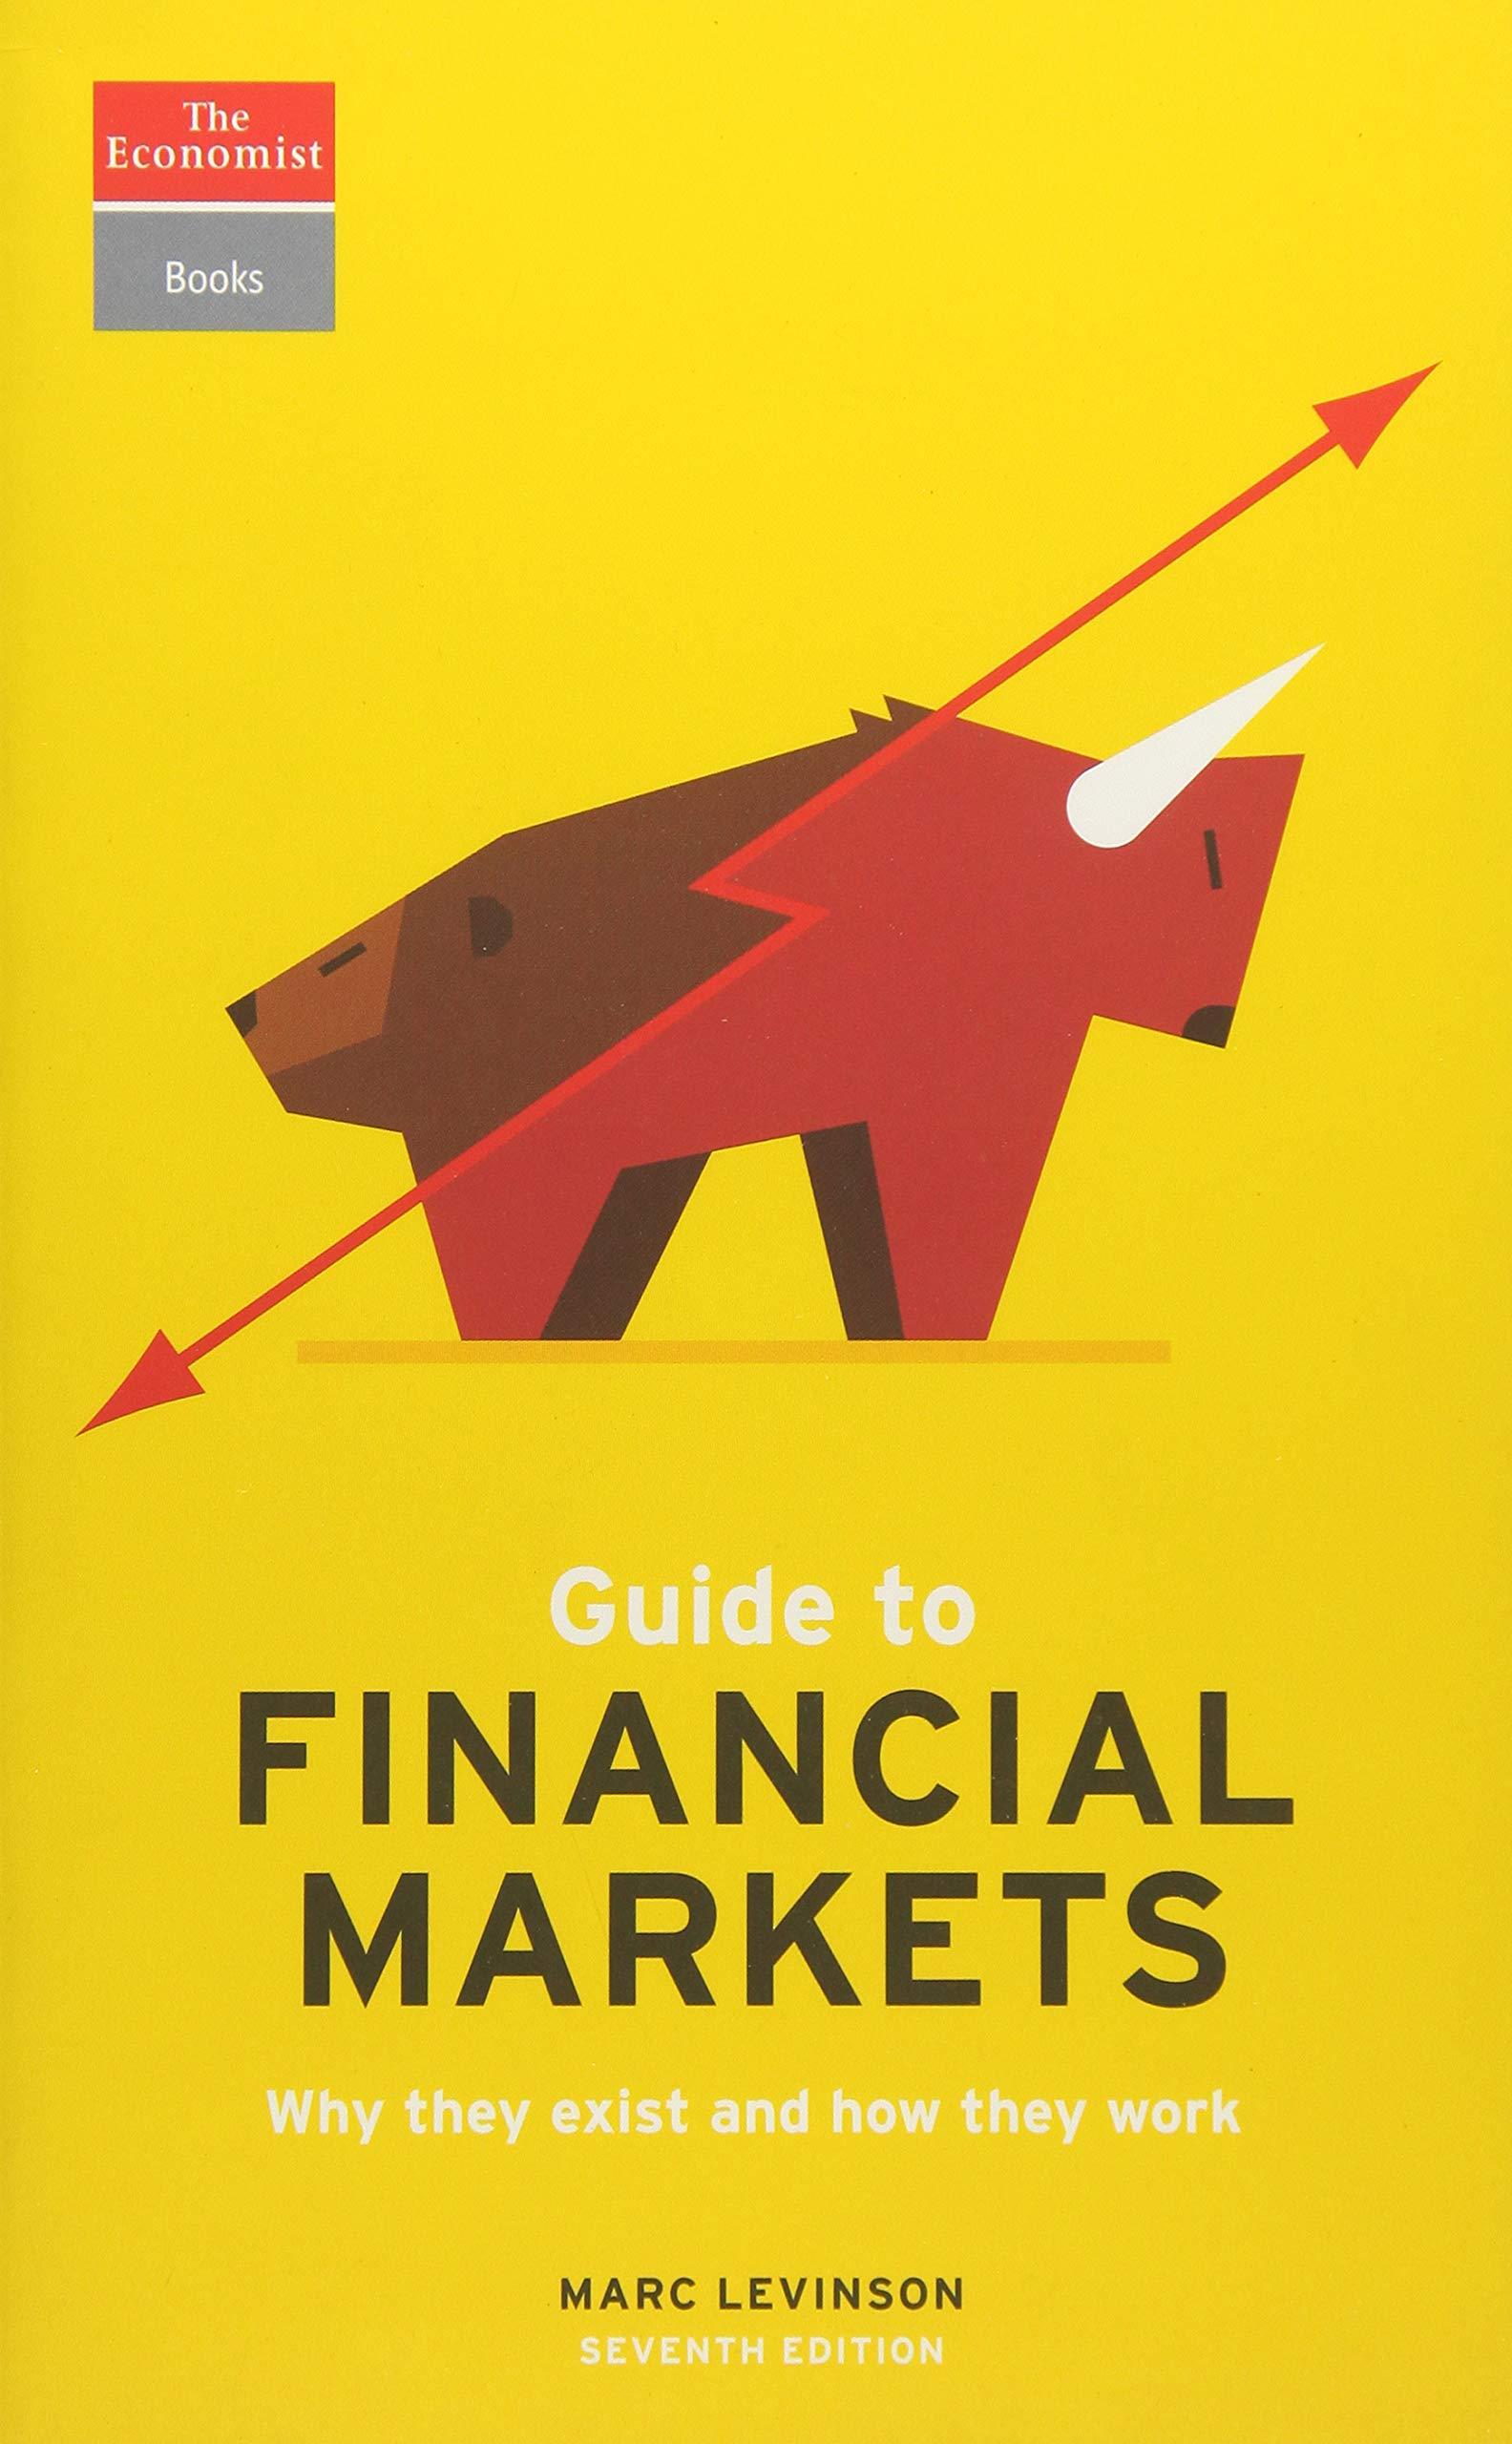 guide to financial markets why they exist and how they work 1st edition the economist, marc levinson